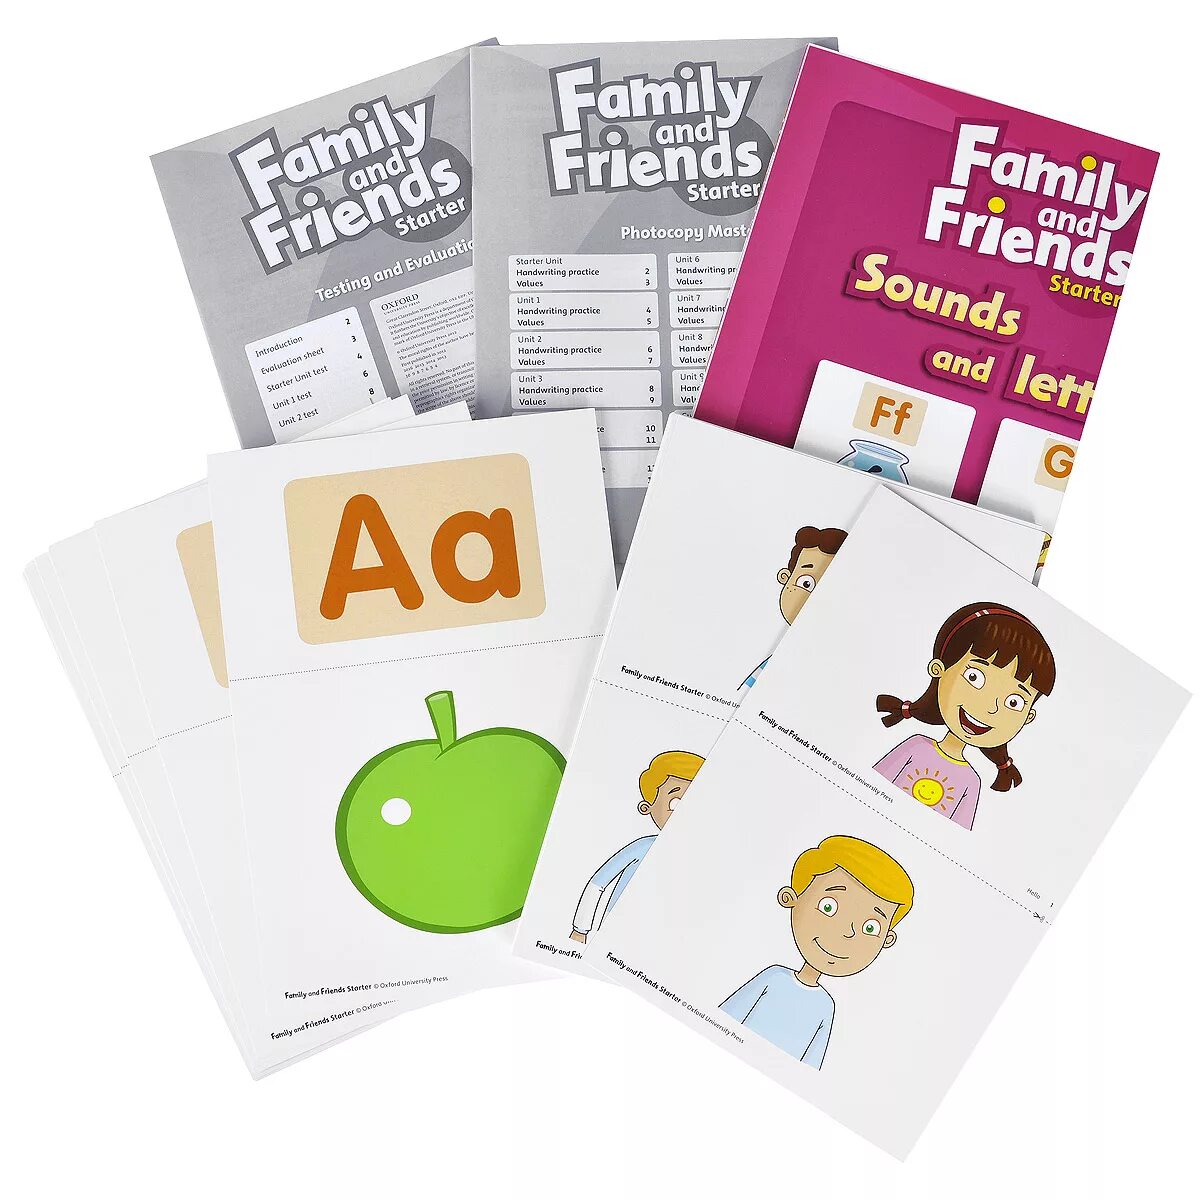 Family and friends starter book. Family and friends: Starter. Фэмили френдс стартер. УМК Family and friends. Family and friends Starter карточки.